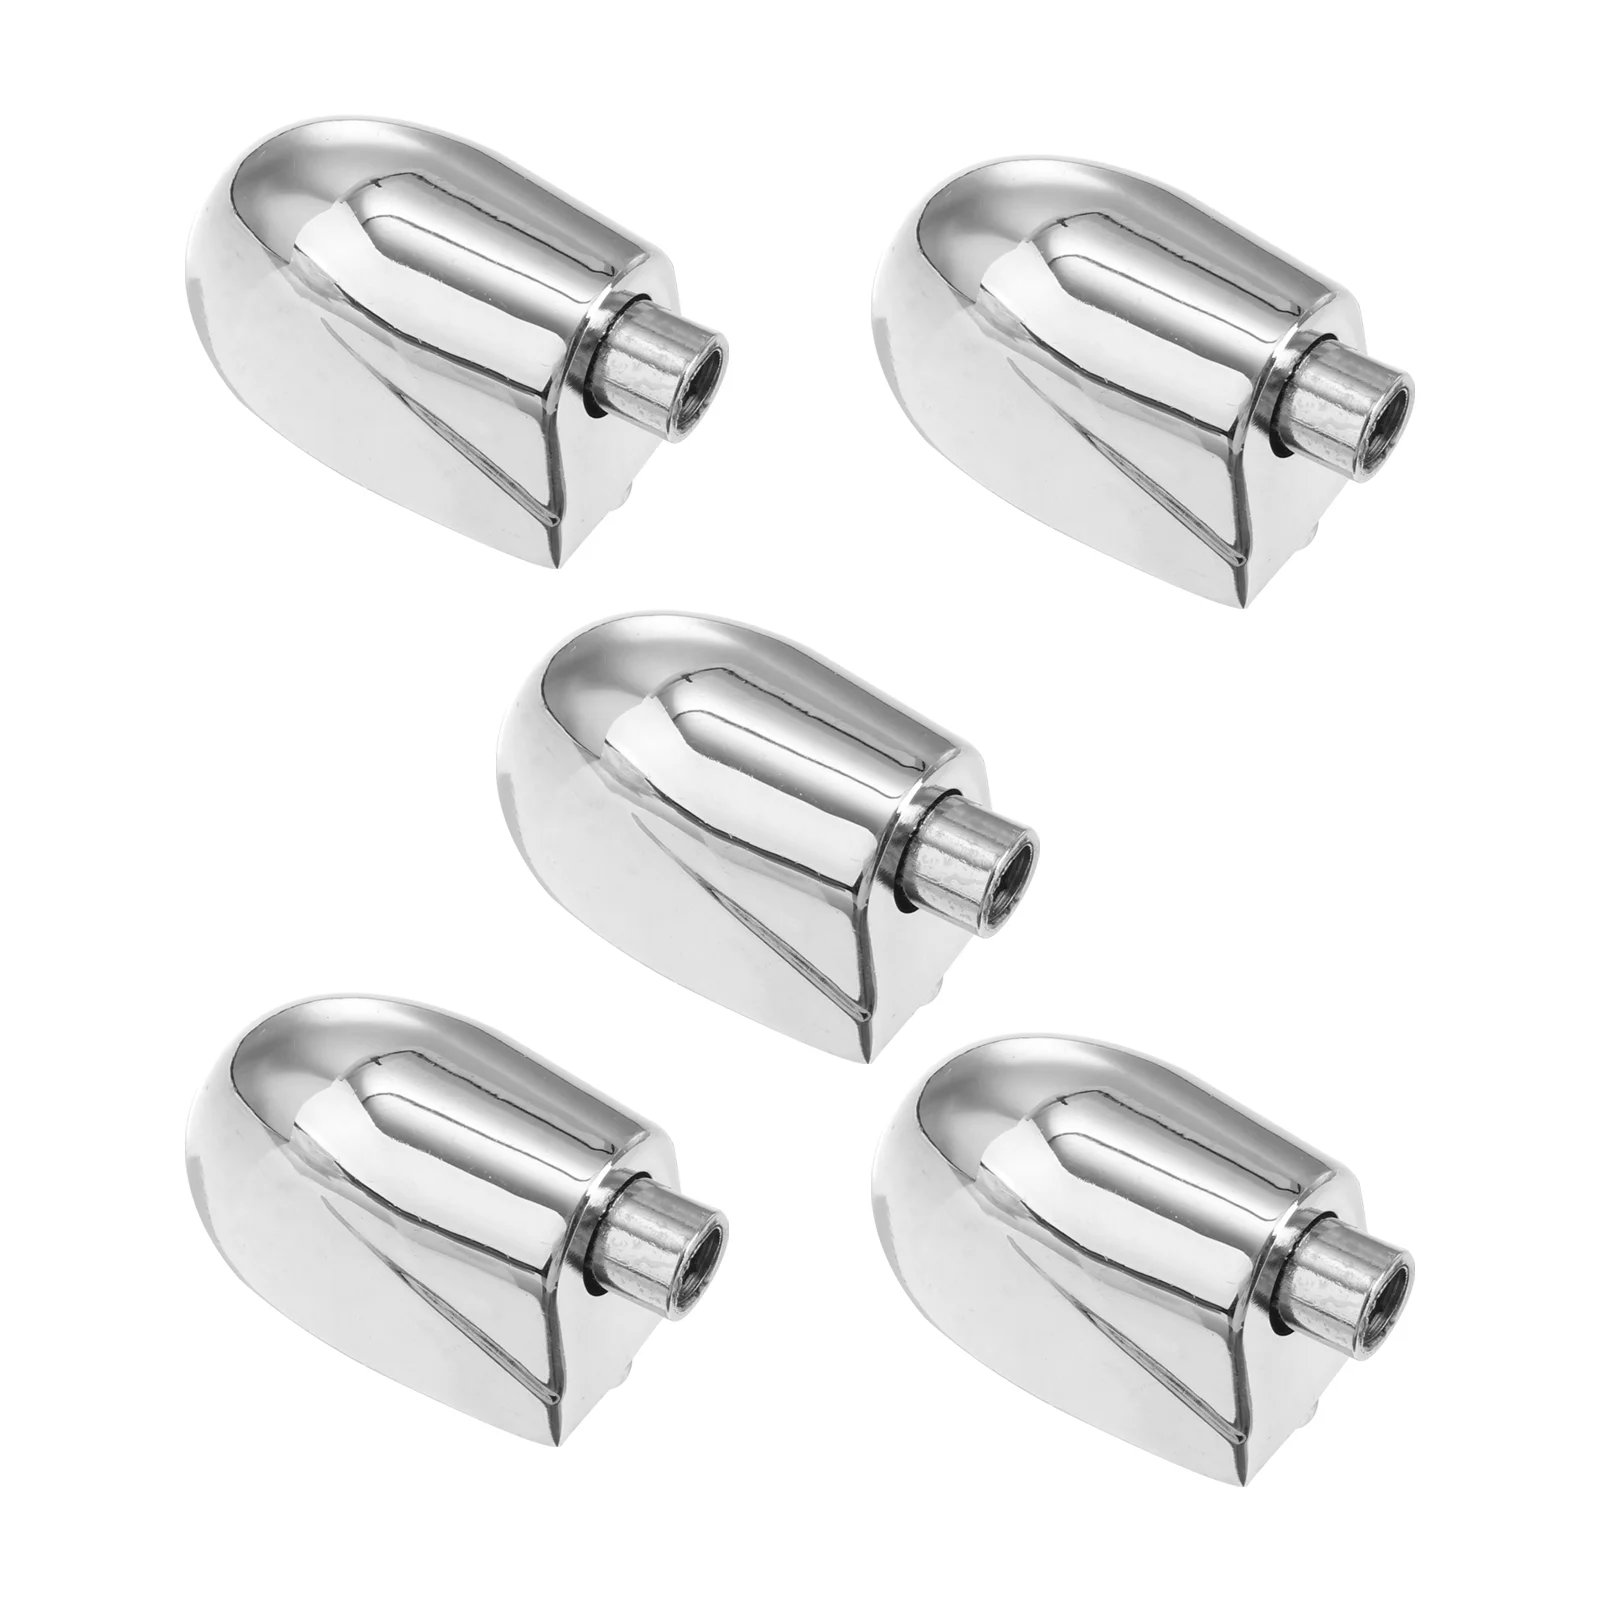 

5Pcs Drum Claw Hook For Bass Drums Snare Drum Parts Accessories Replacement WC21 ( Silver )